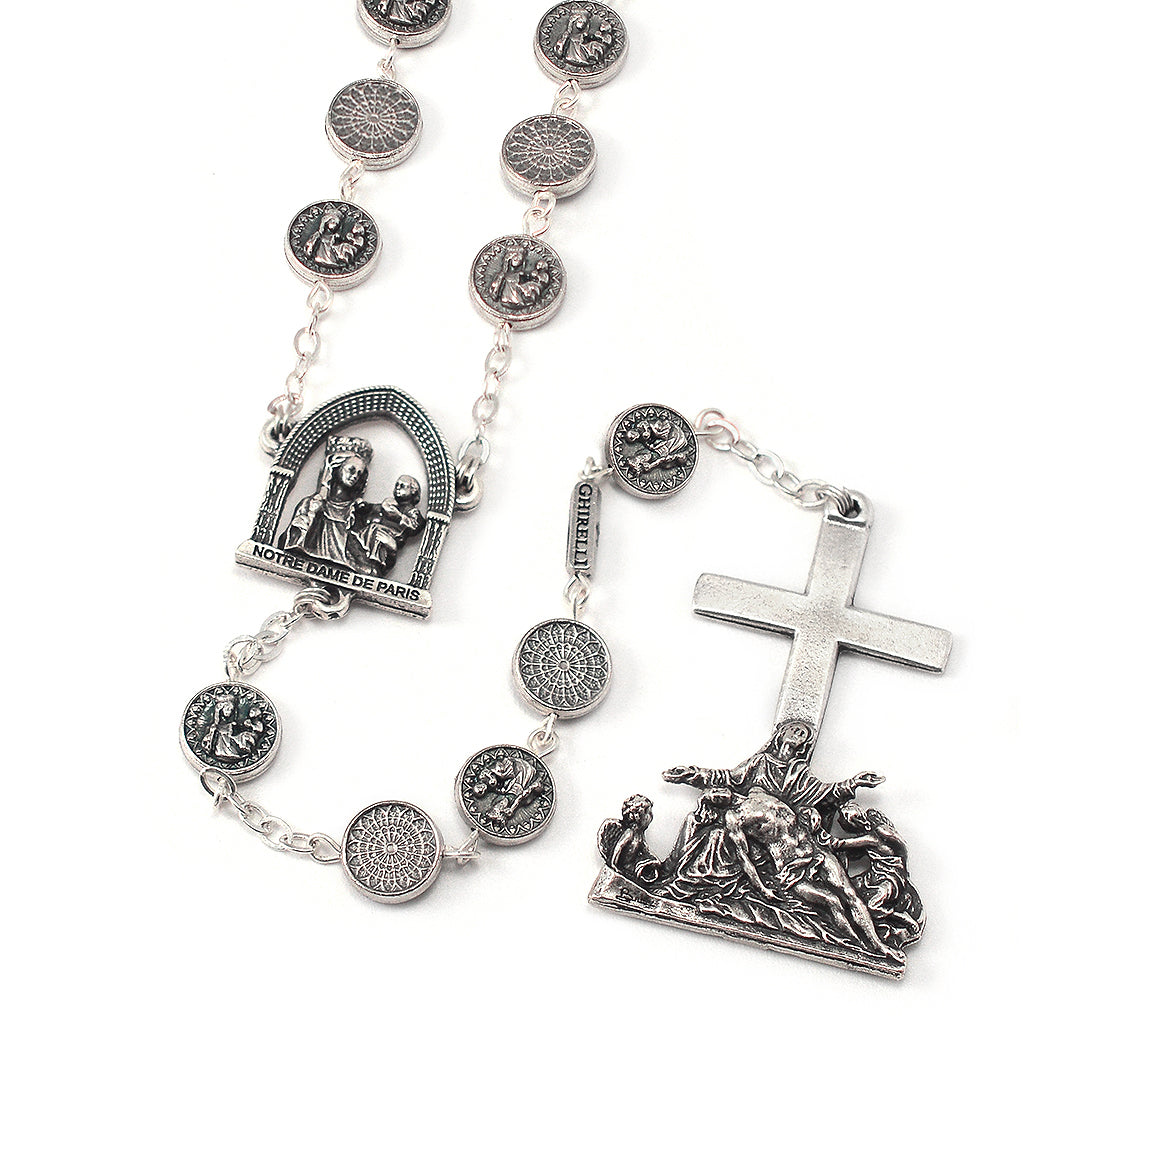 Notre Dame de Paris Cathedral Rosary with Rose Window Beads, Silver -  Ghirelli Rosaries